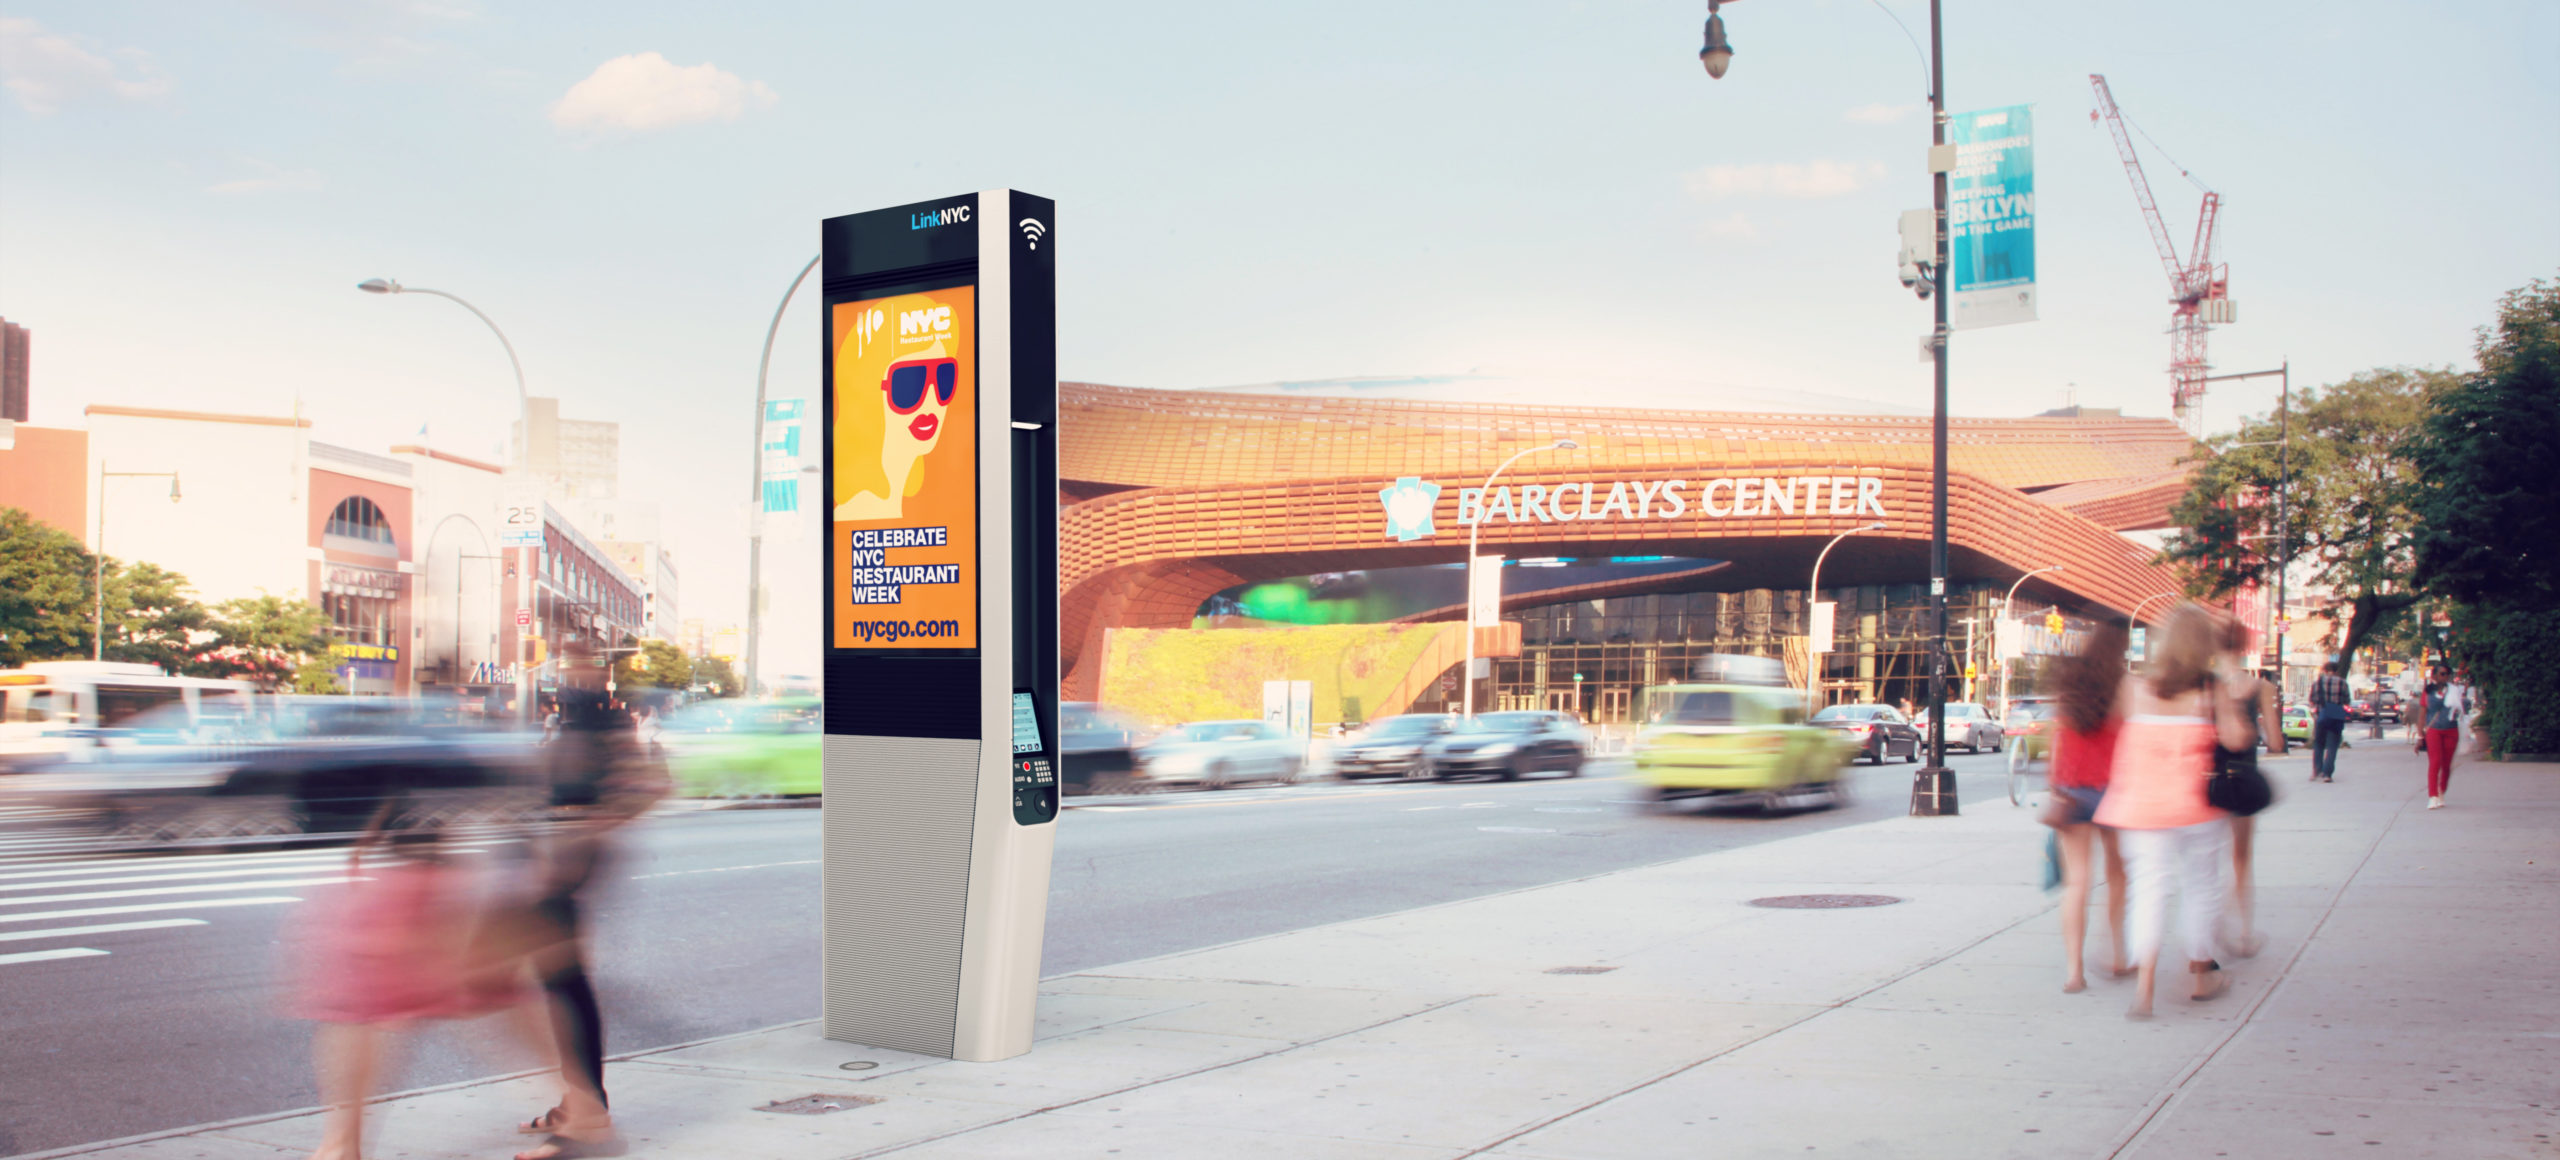 The Plan To Turn NYC’s Old Payphones Into Free Gigabit Wi-Fi Hot Spots